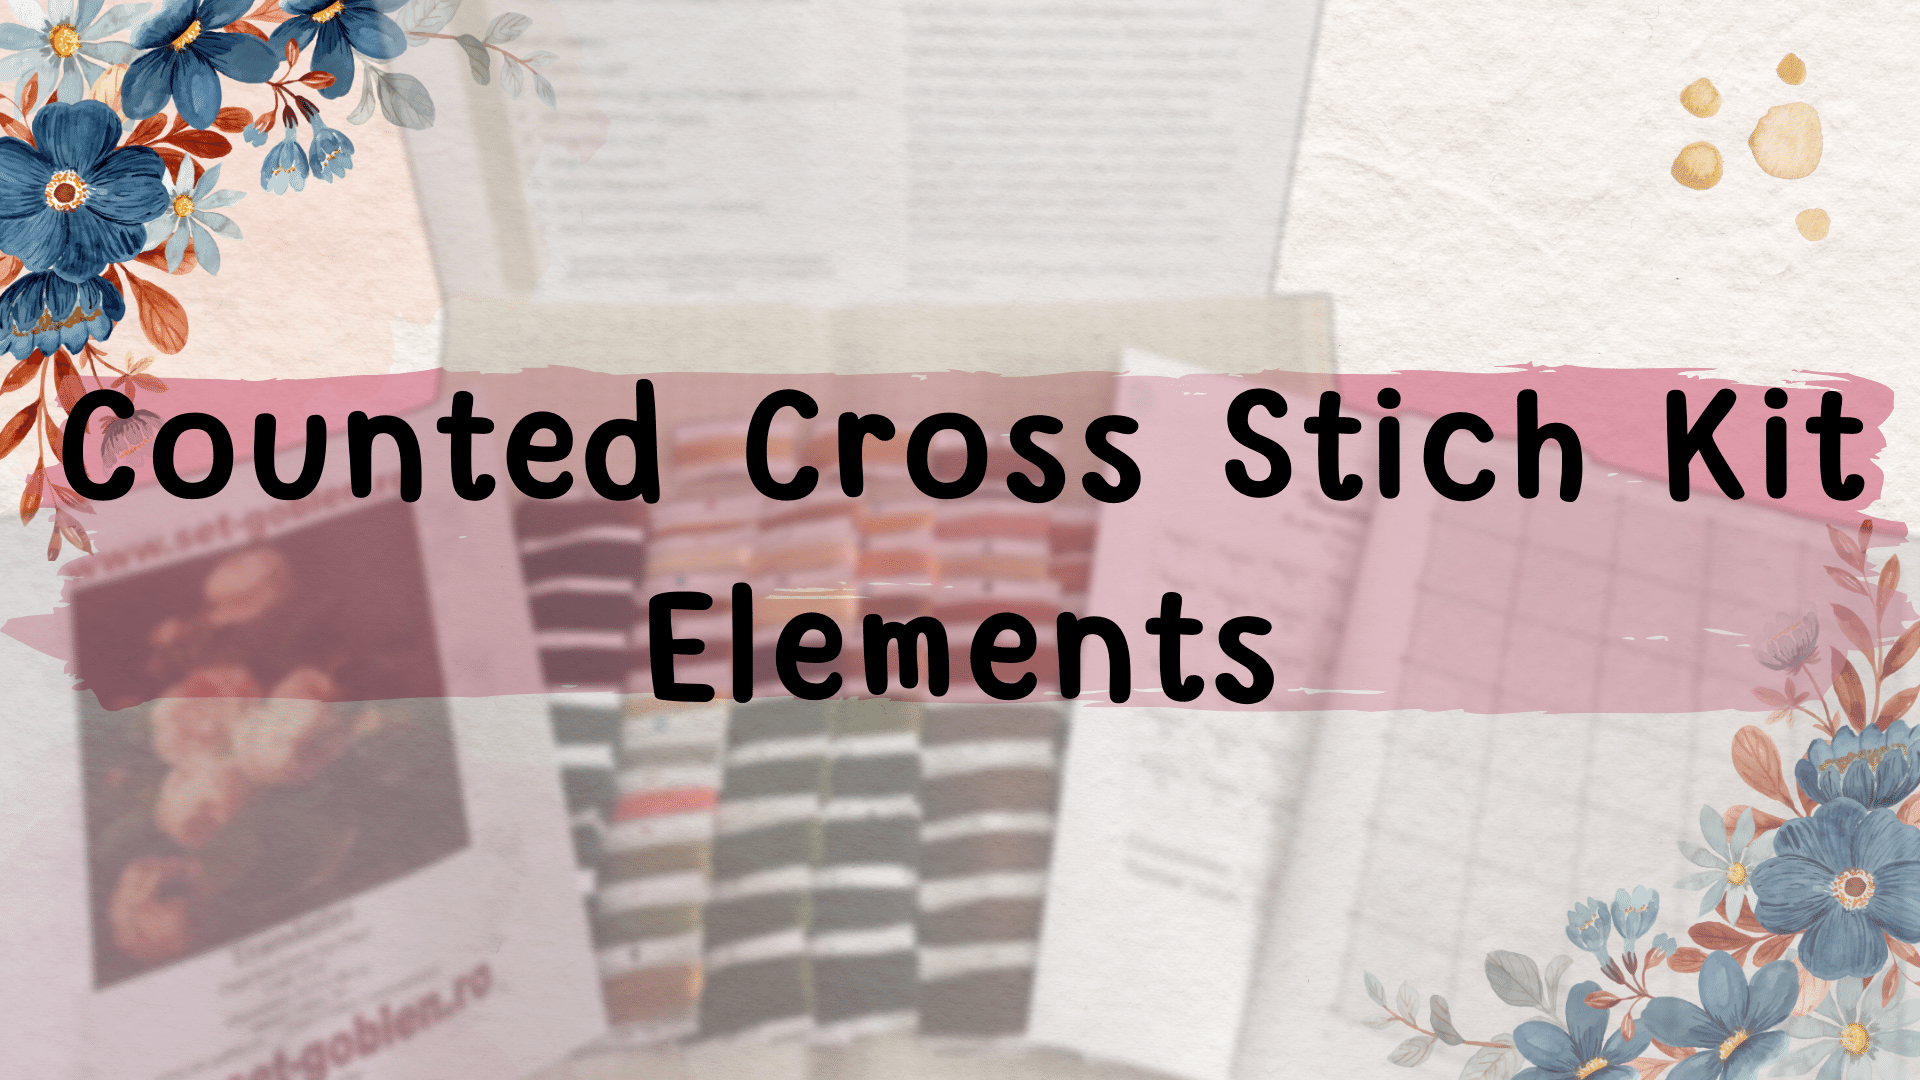 Counted Cross Stich Elements